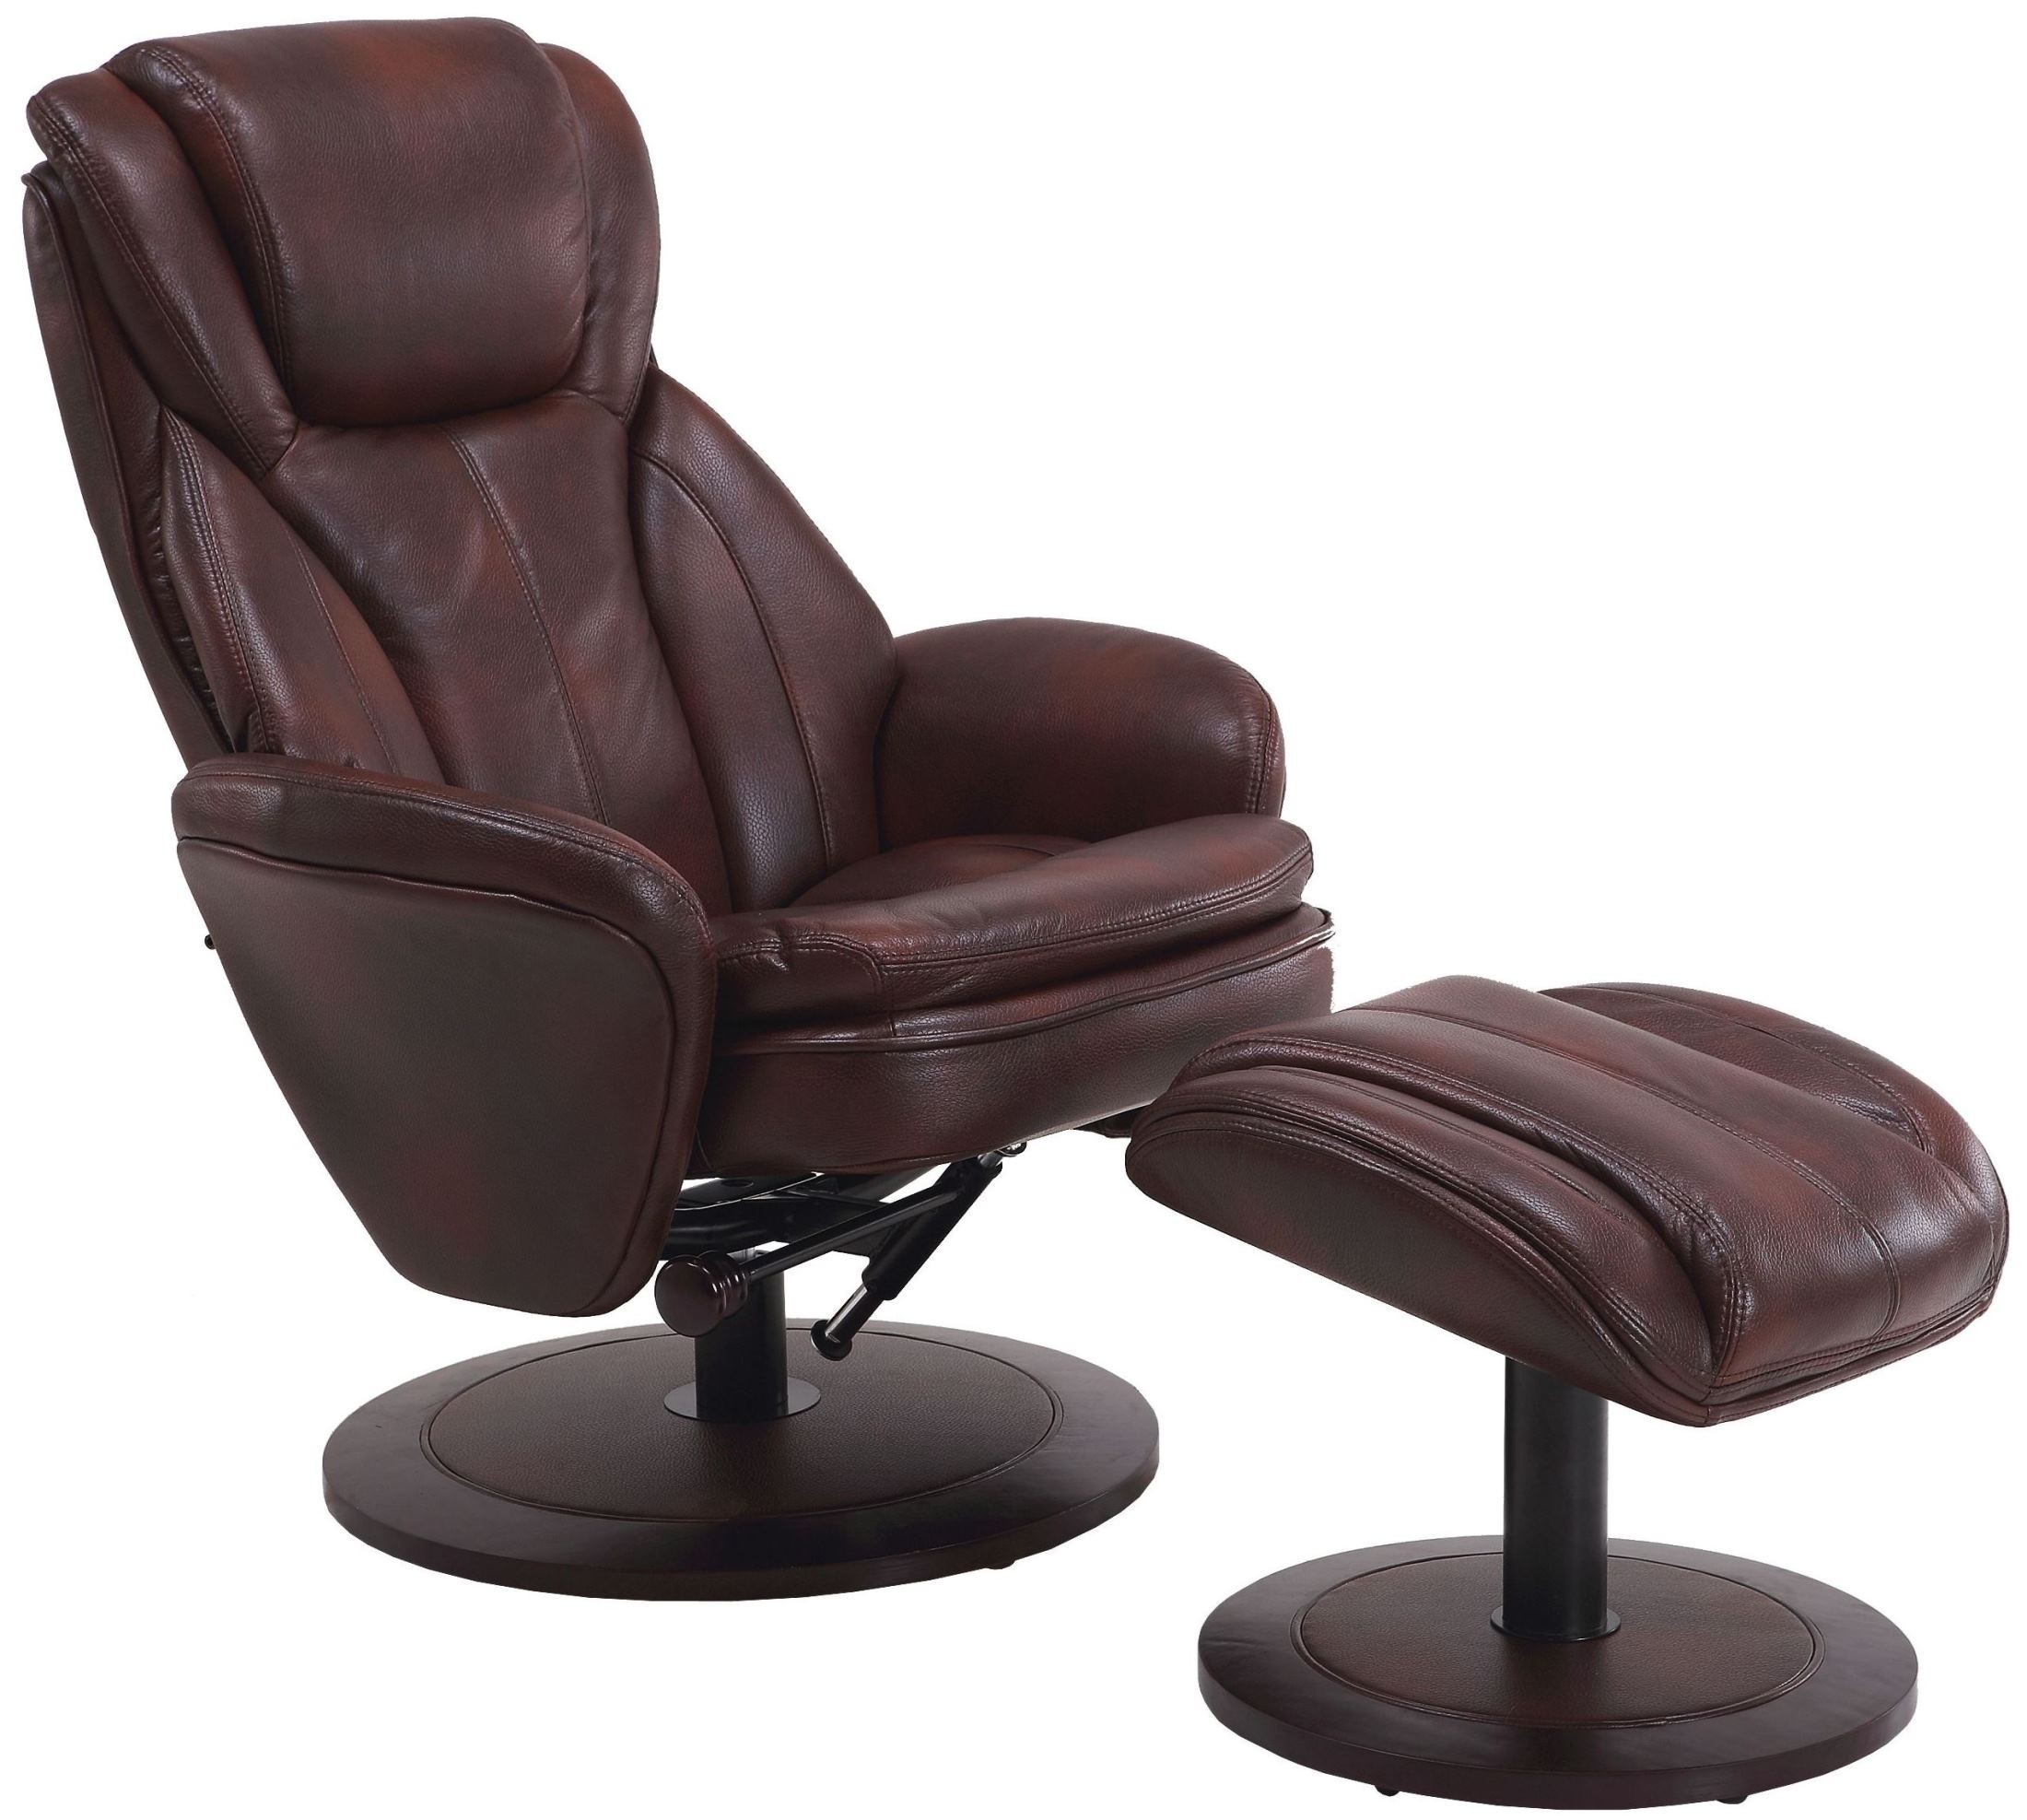 Norway whisky breathable swivel recliner with ottoman from